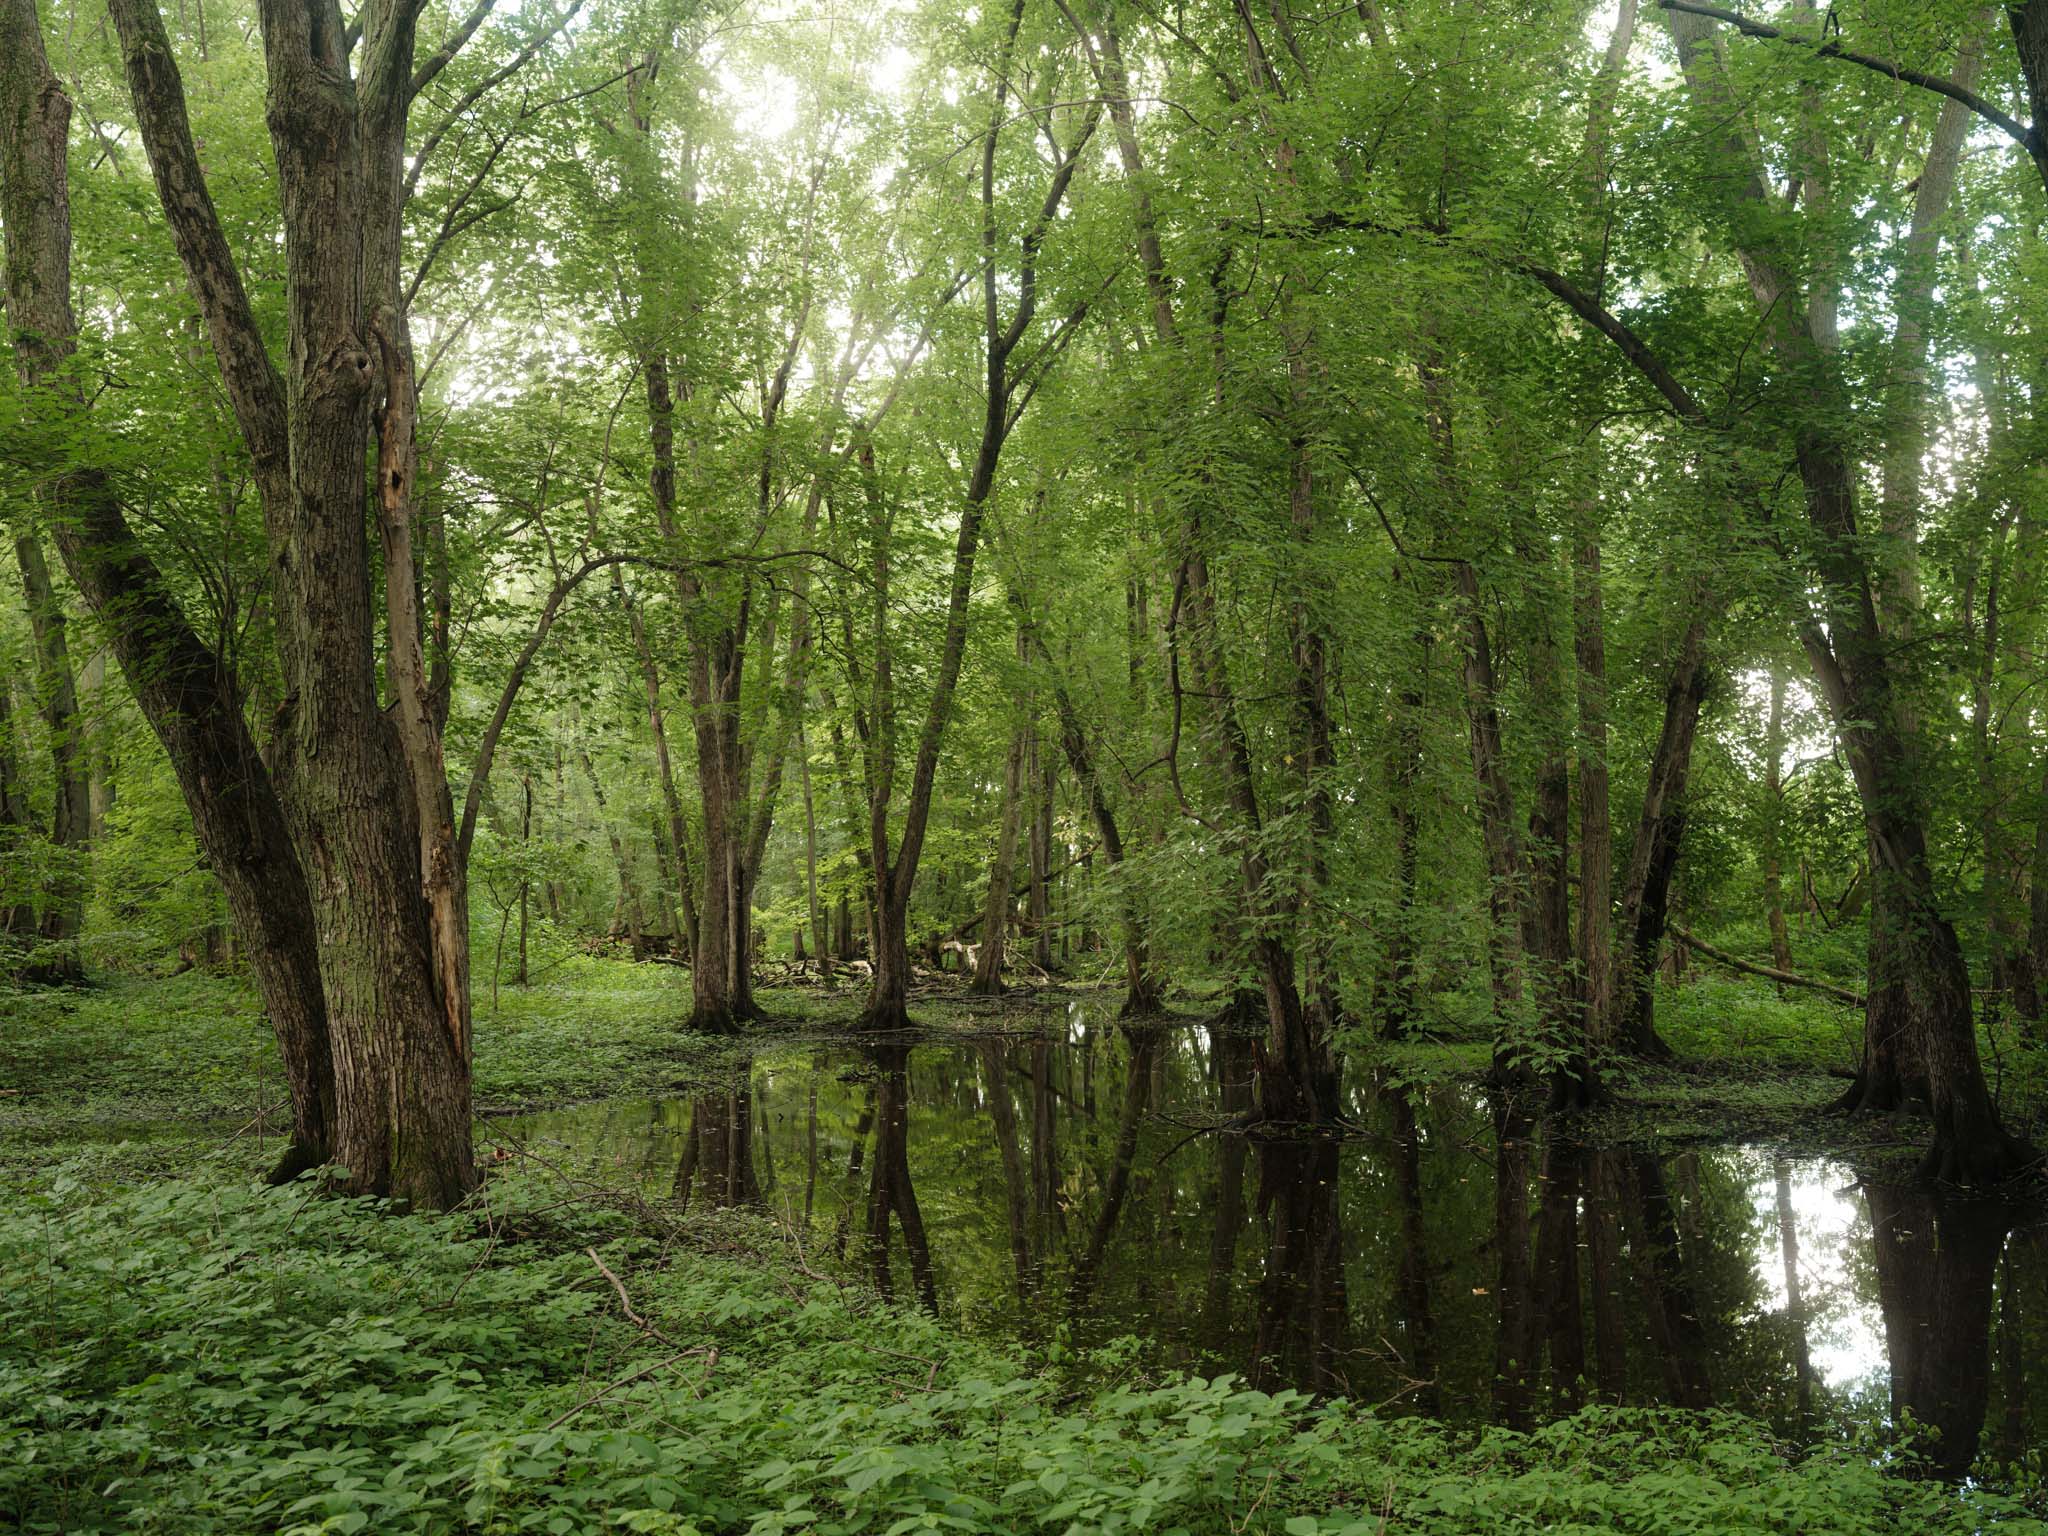 Swampy forest land, all in green